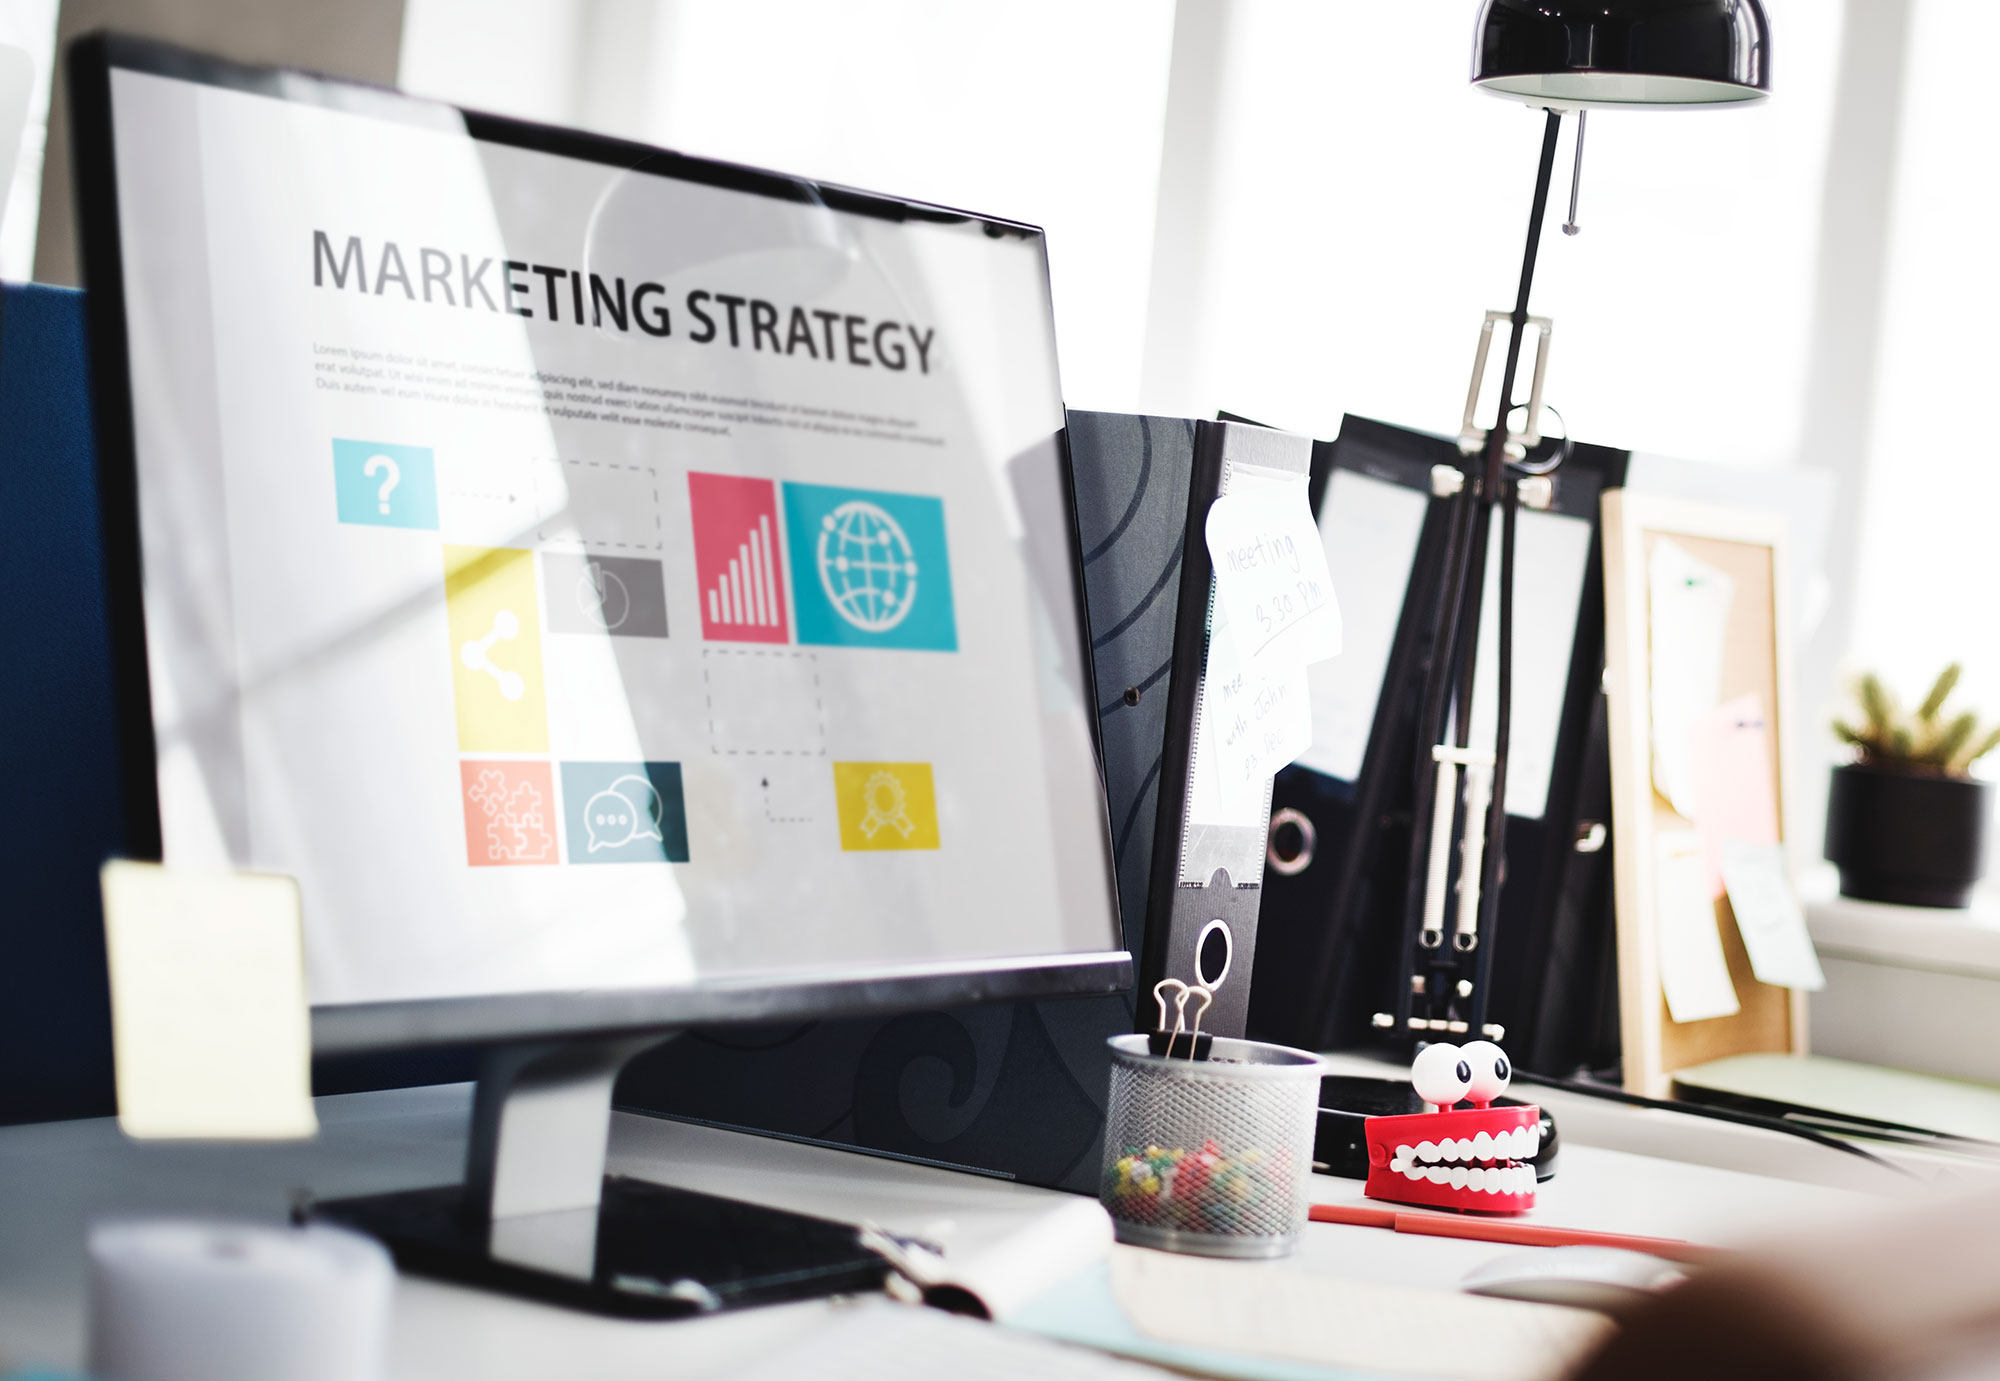 Why Should You Create a Marketing Strategy?